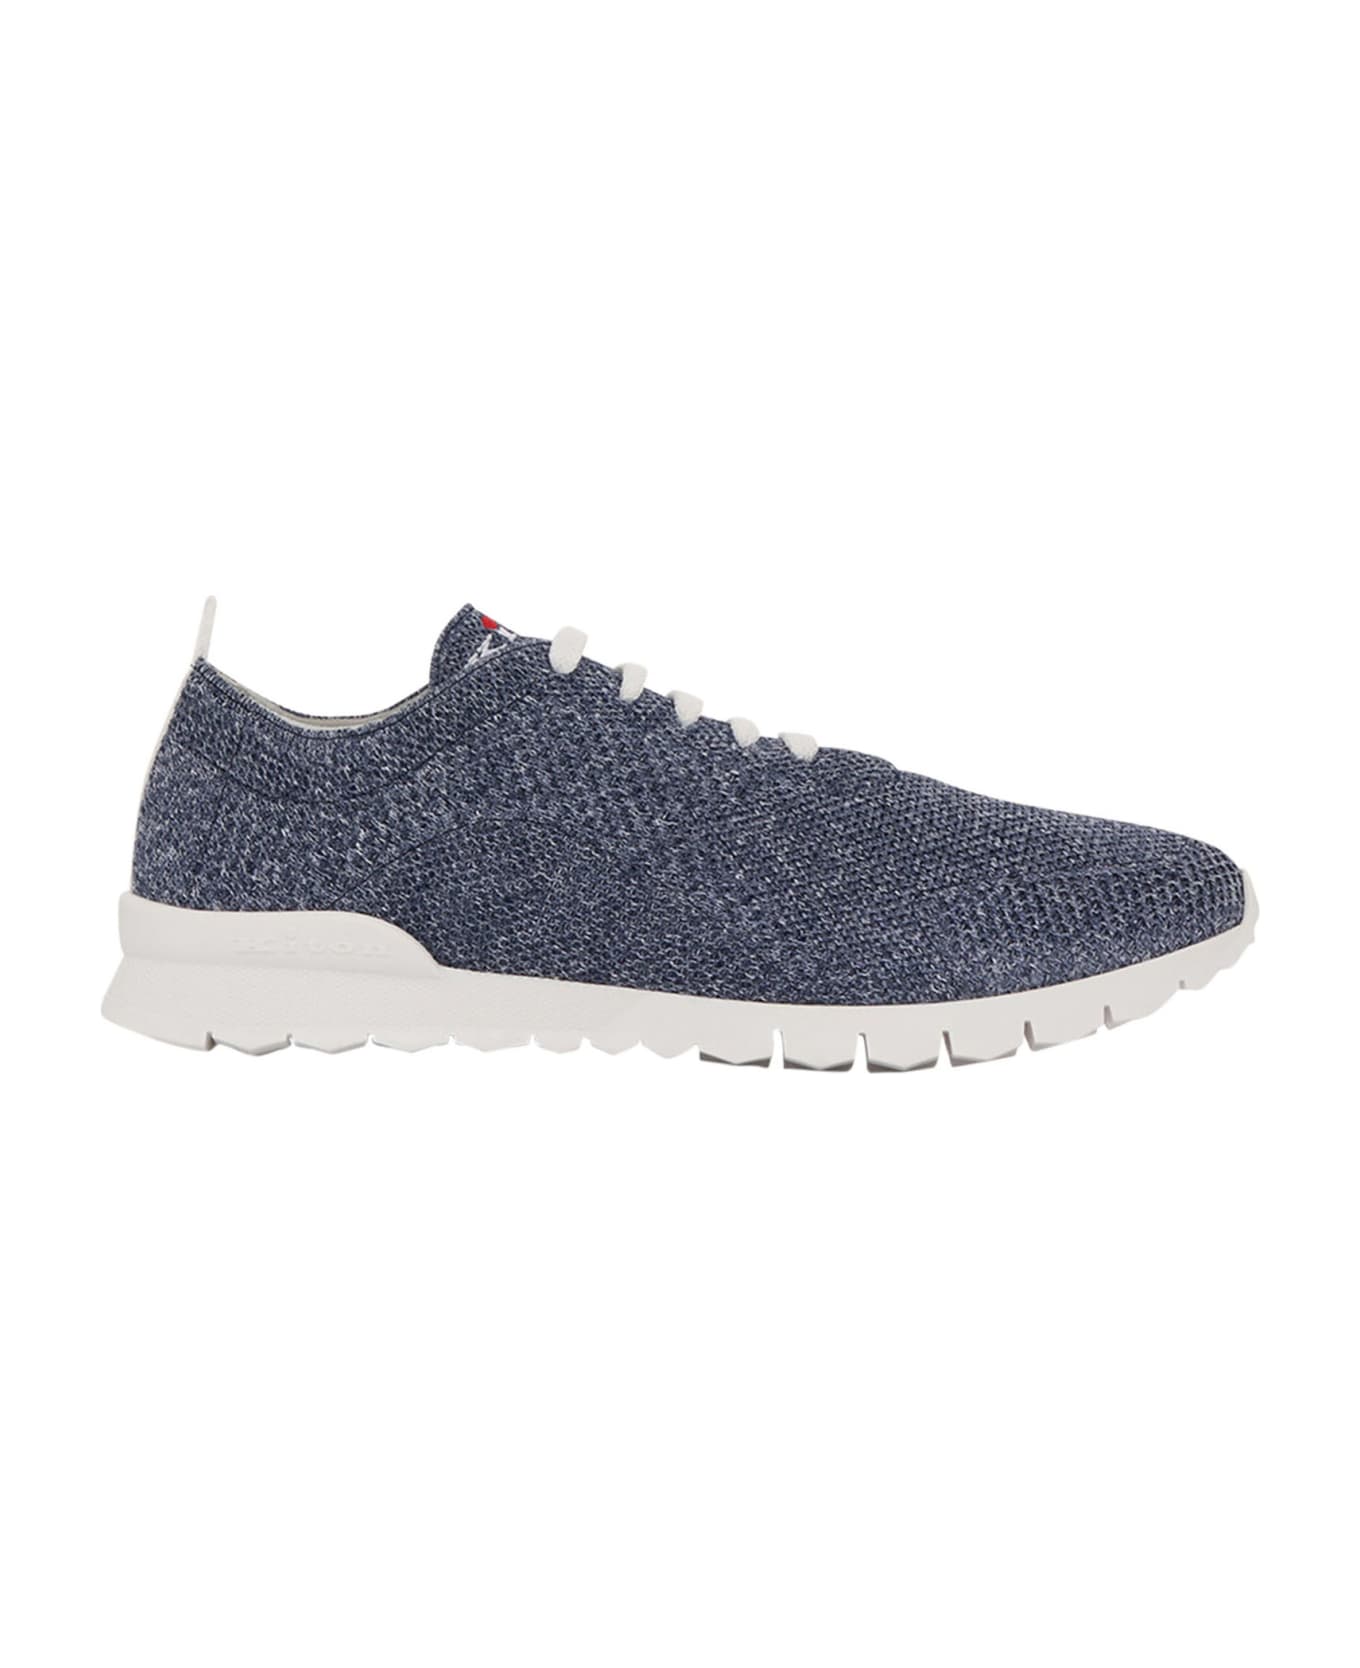 Kiton Fits - Sneakers Shoes Cotton - BLUE